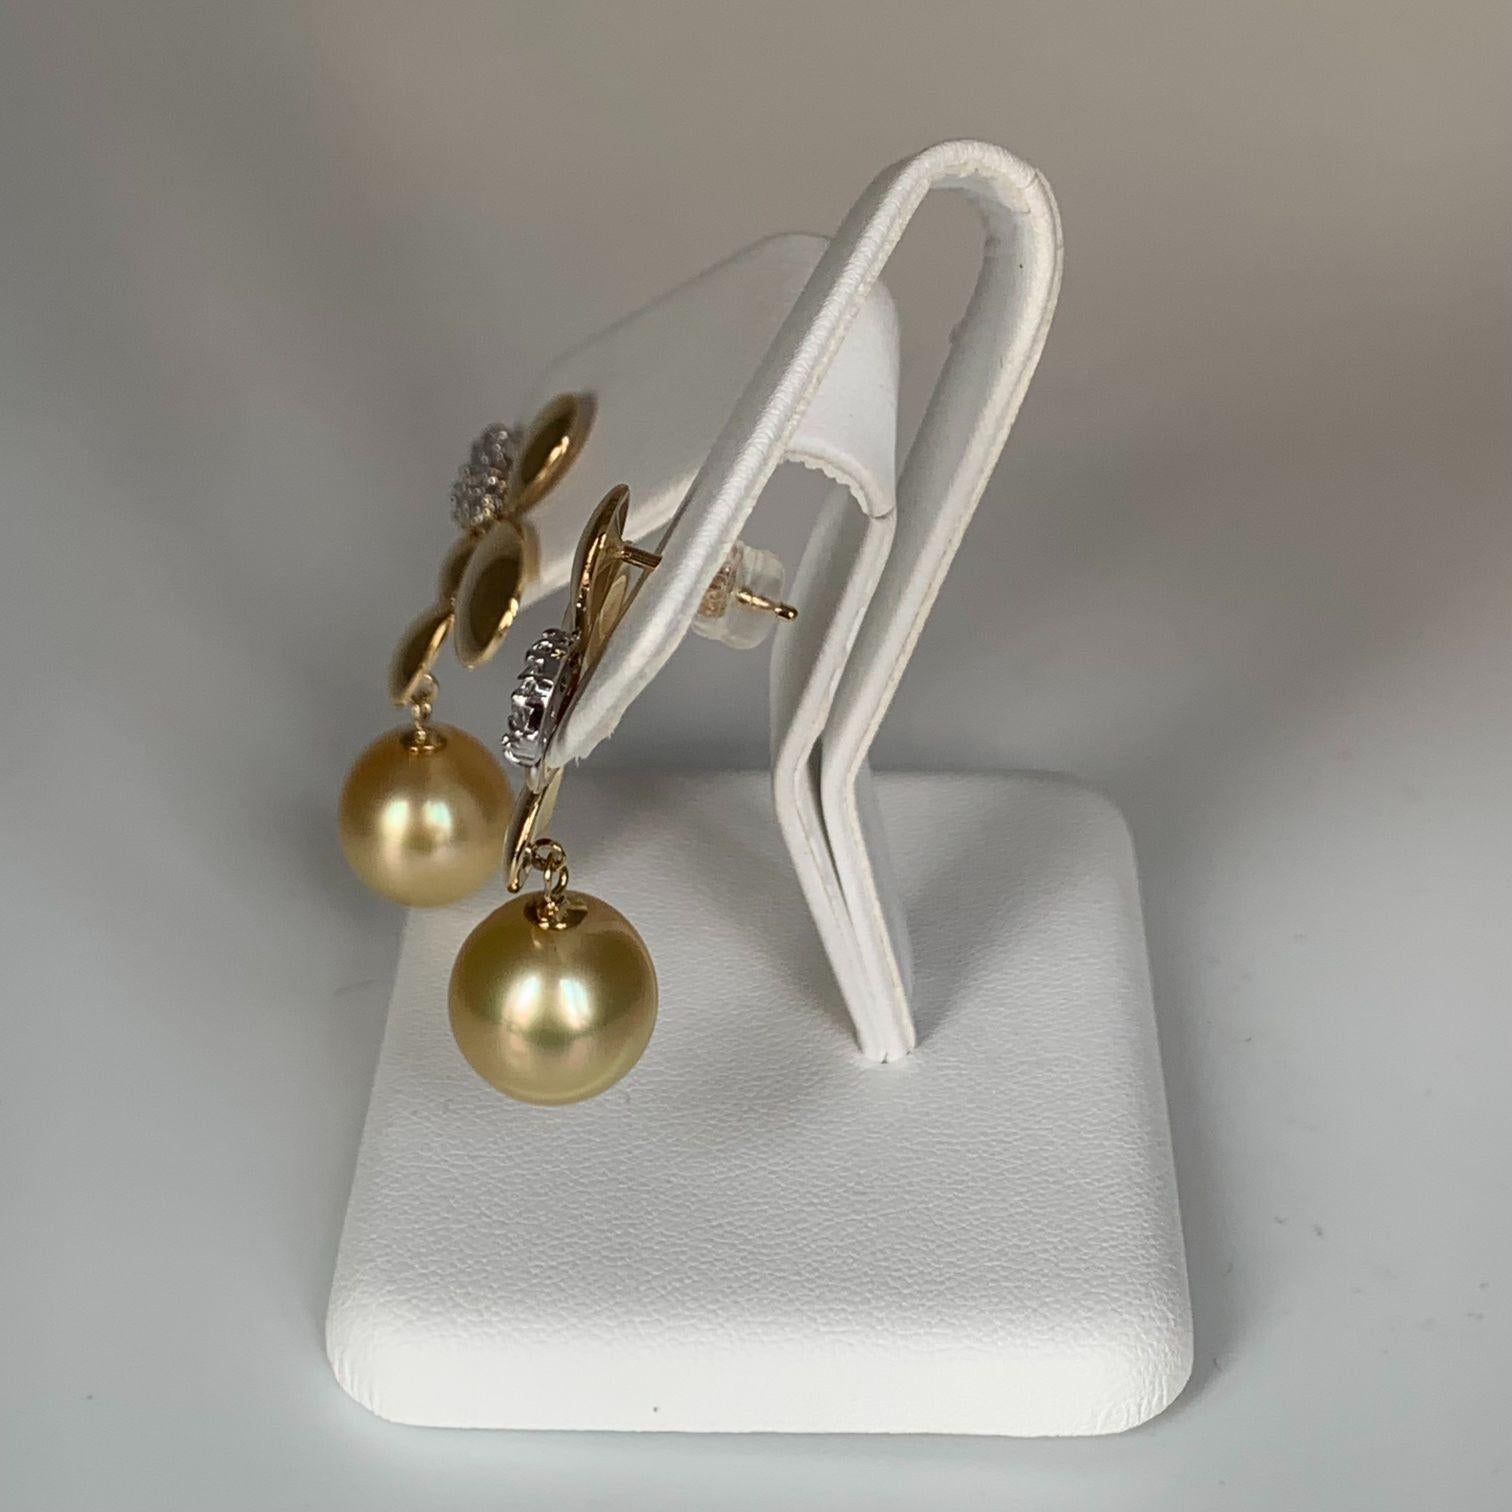 Celebrate our latest Summer / Spring Collection with large and luminous Gold South Sea Pearl 18K Gold Diamond Earrings. Sophisticated and unique, these earrings can be worn day or night.

South Sea Pearls are cultivated in the warm South Pacific